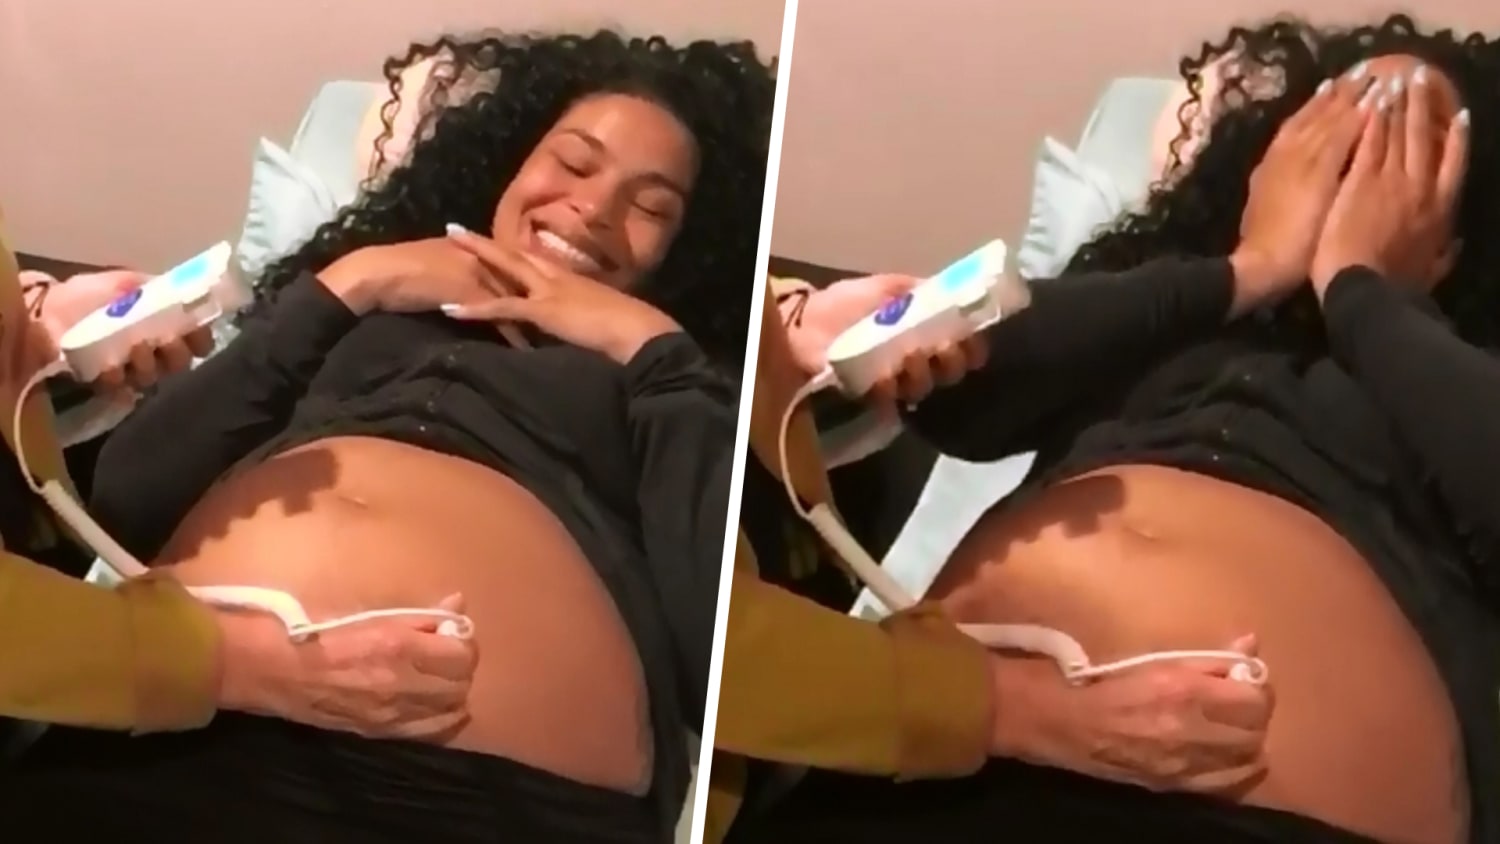 Mom-to-be Jordin Sparks grins with joy during ultrasound - TODAY.com1920 x 1080